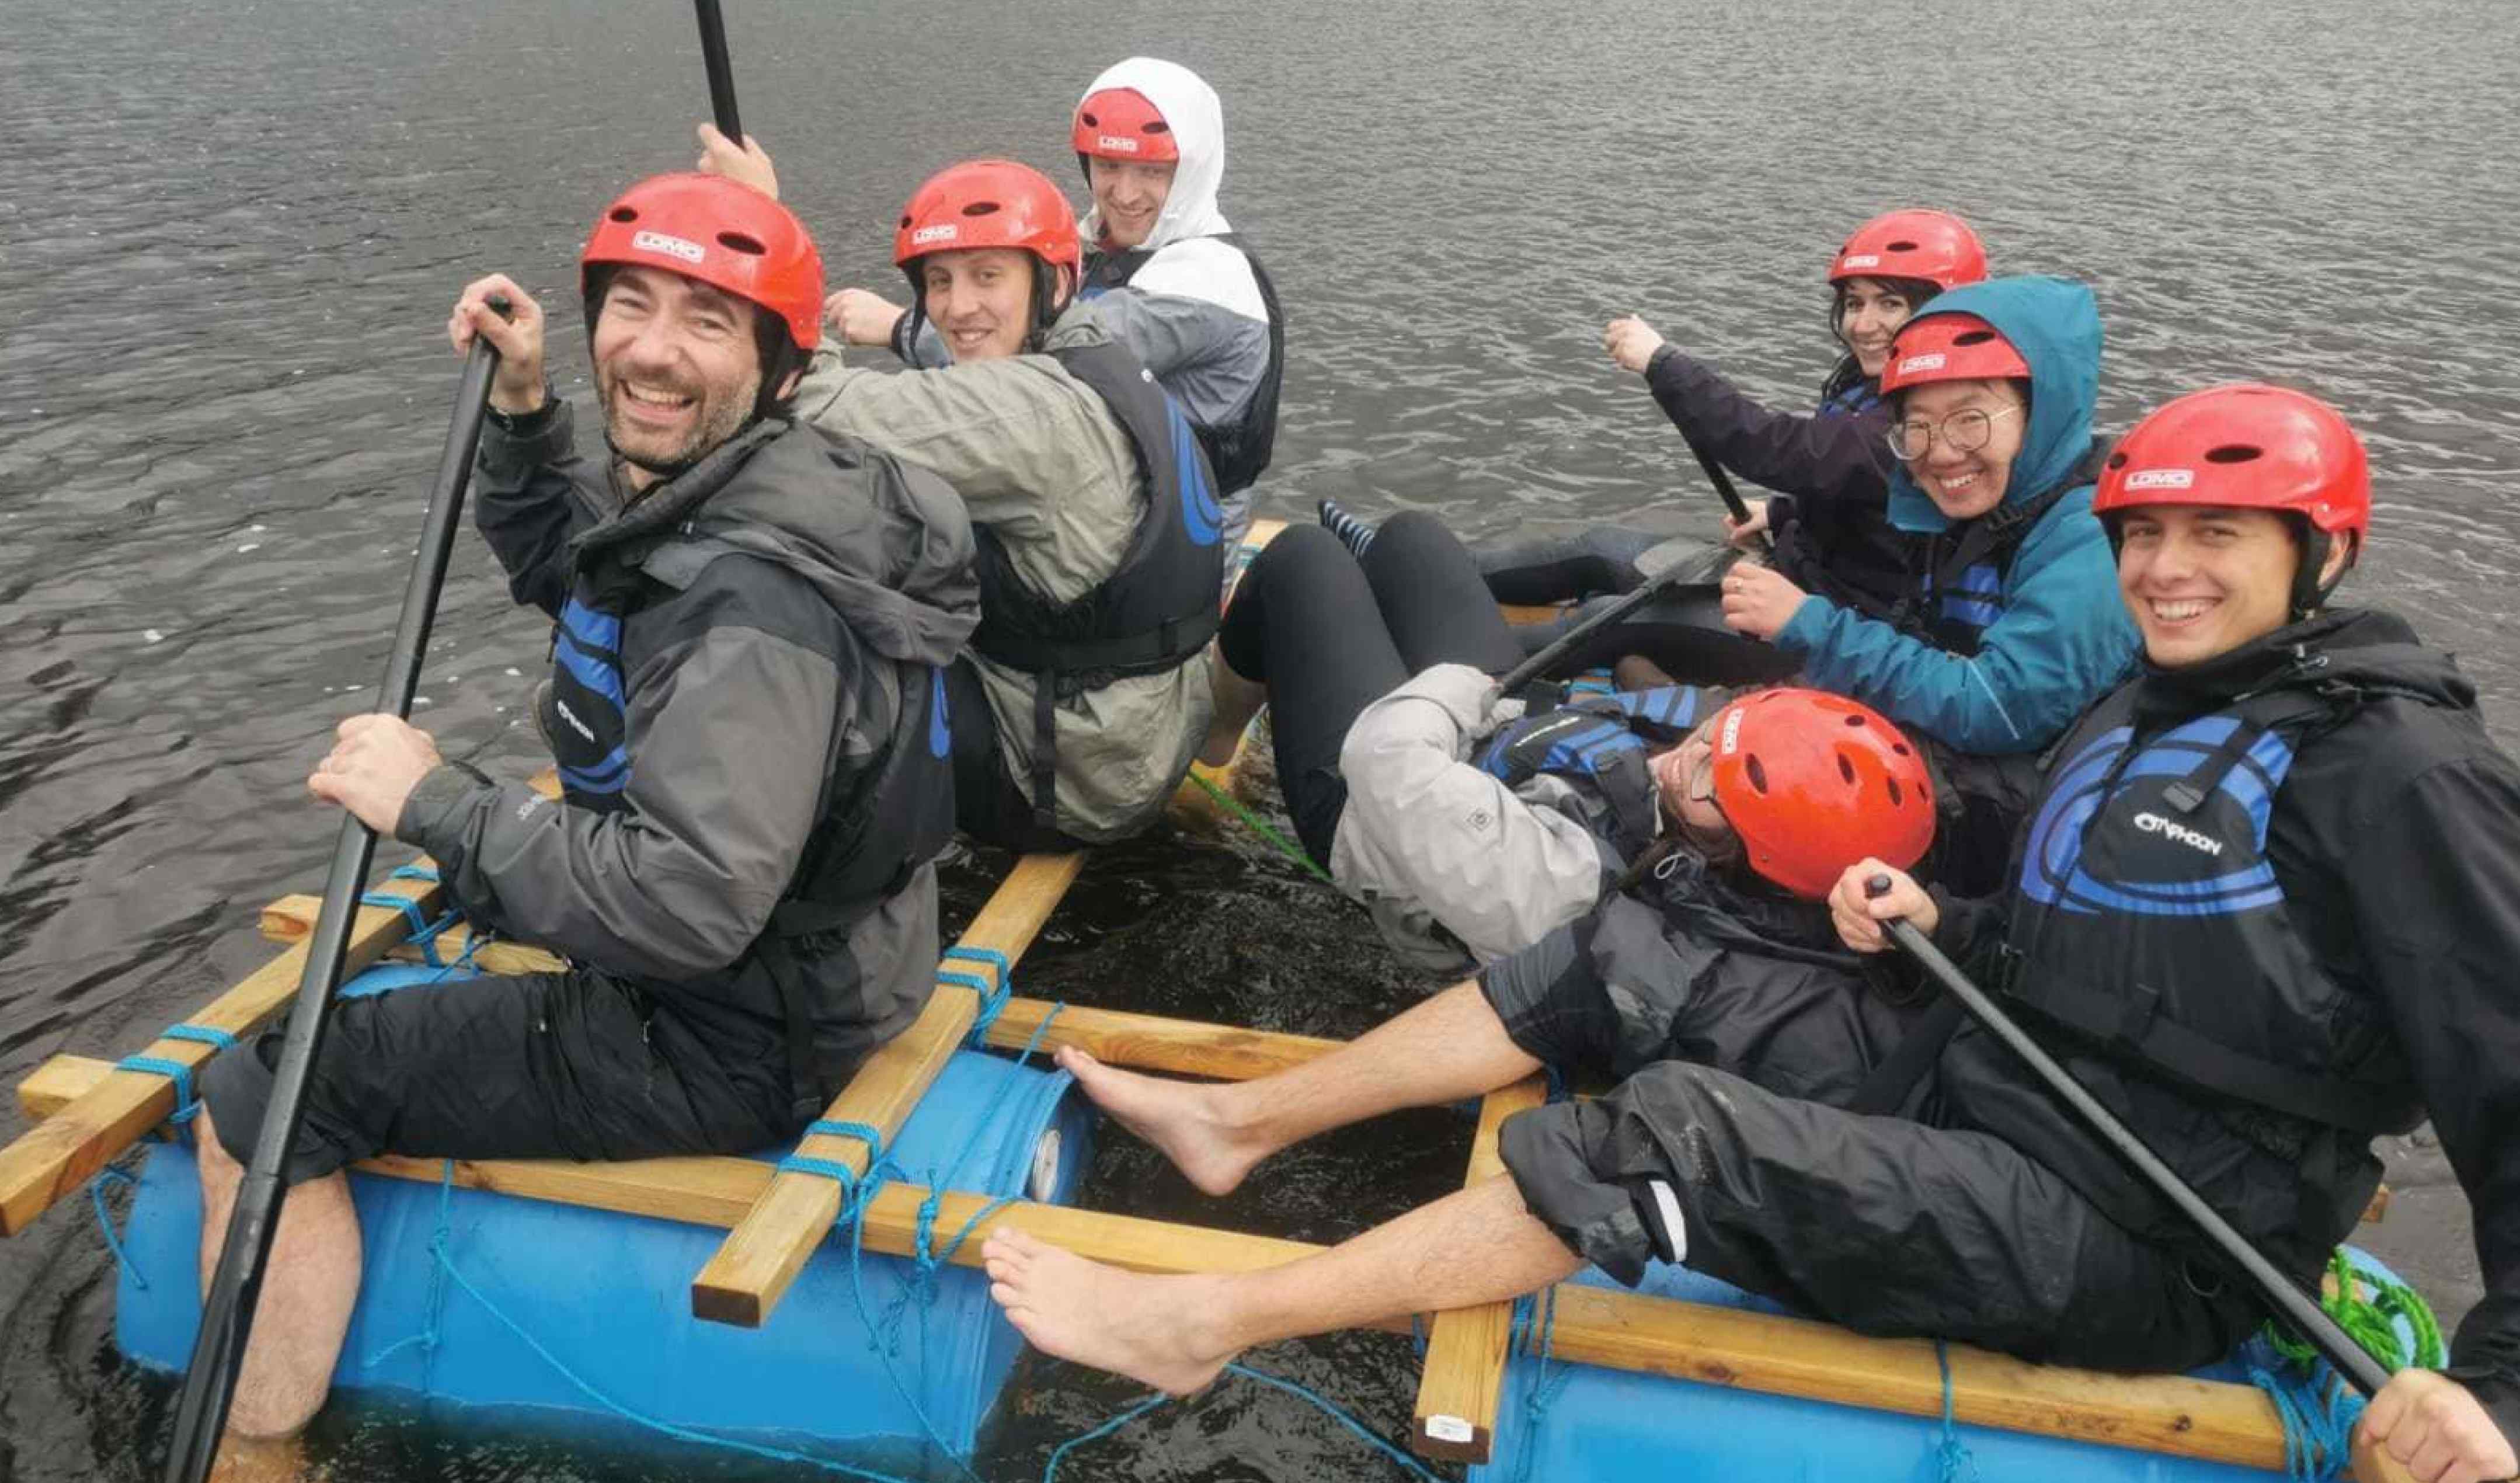 Group on floating raft